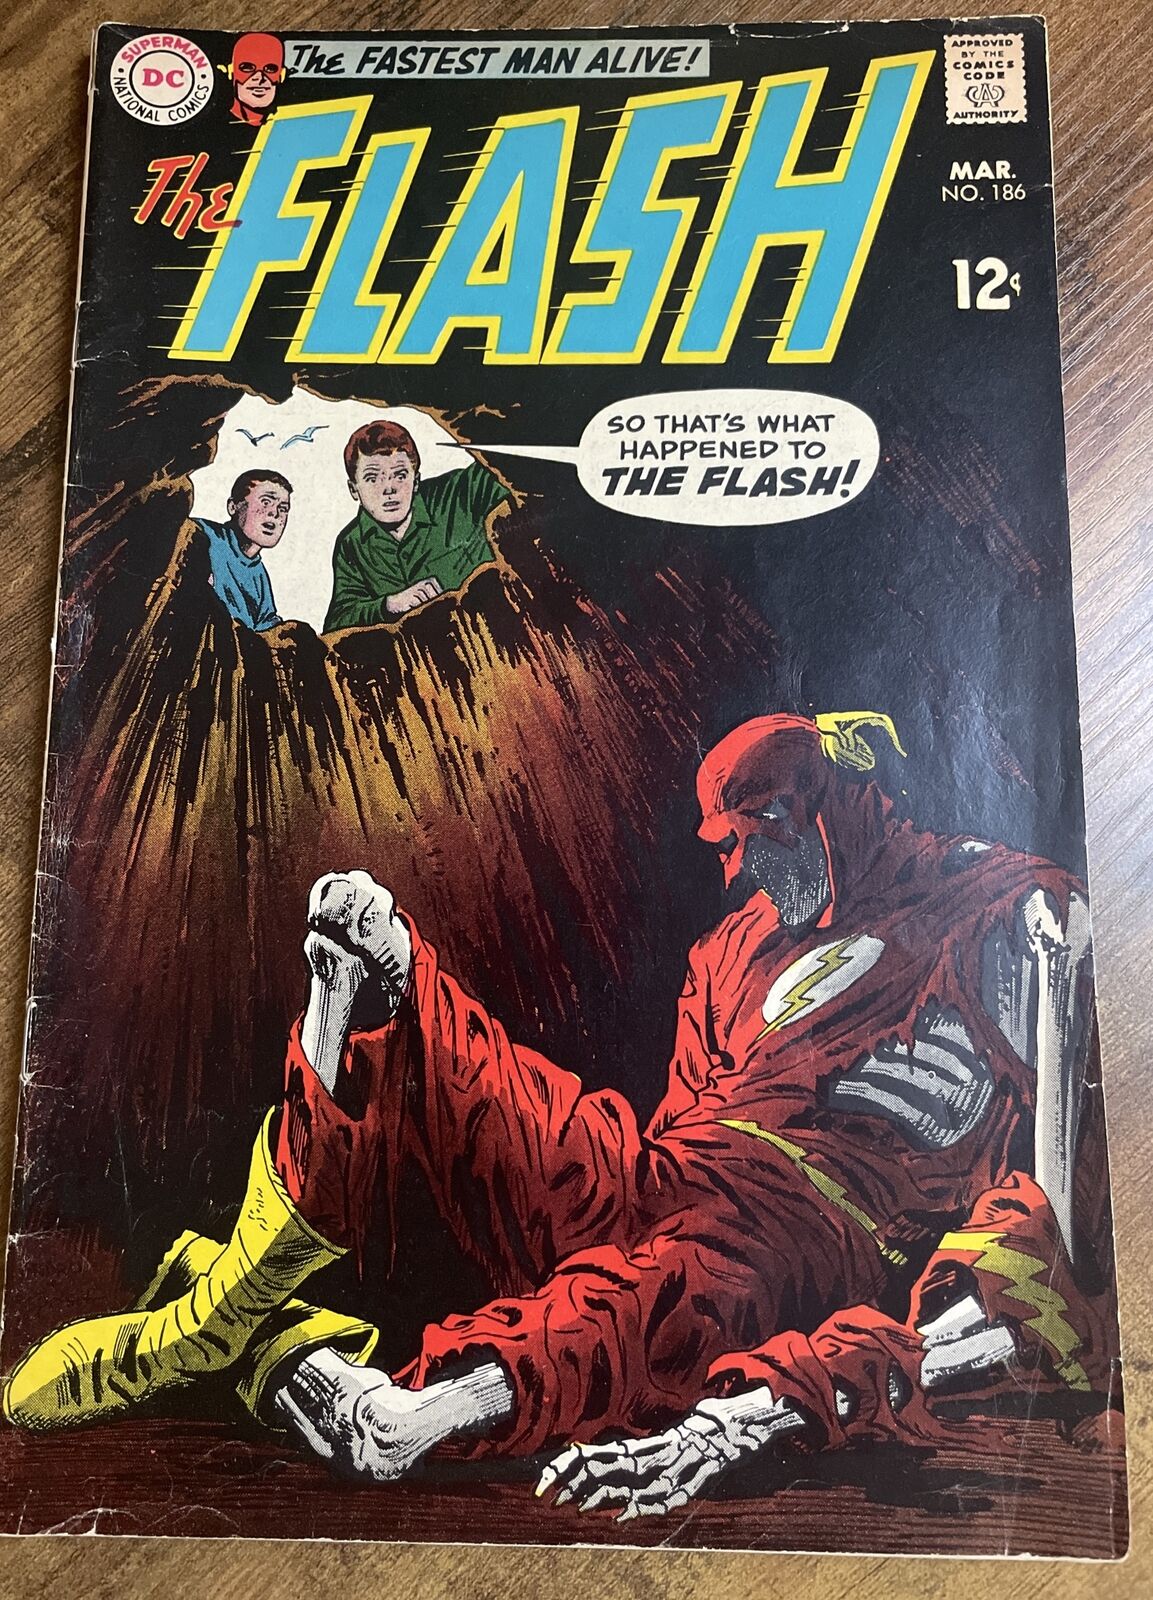 Flash (1959 series) #186 in Good condition. DC comics